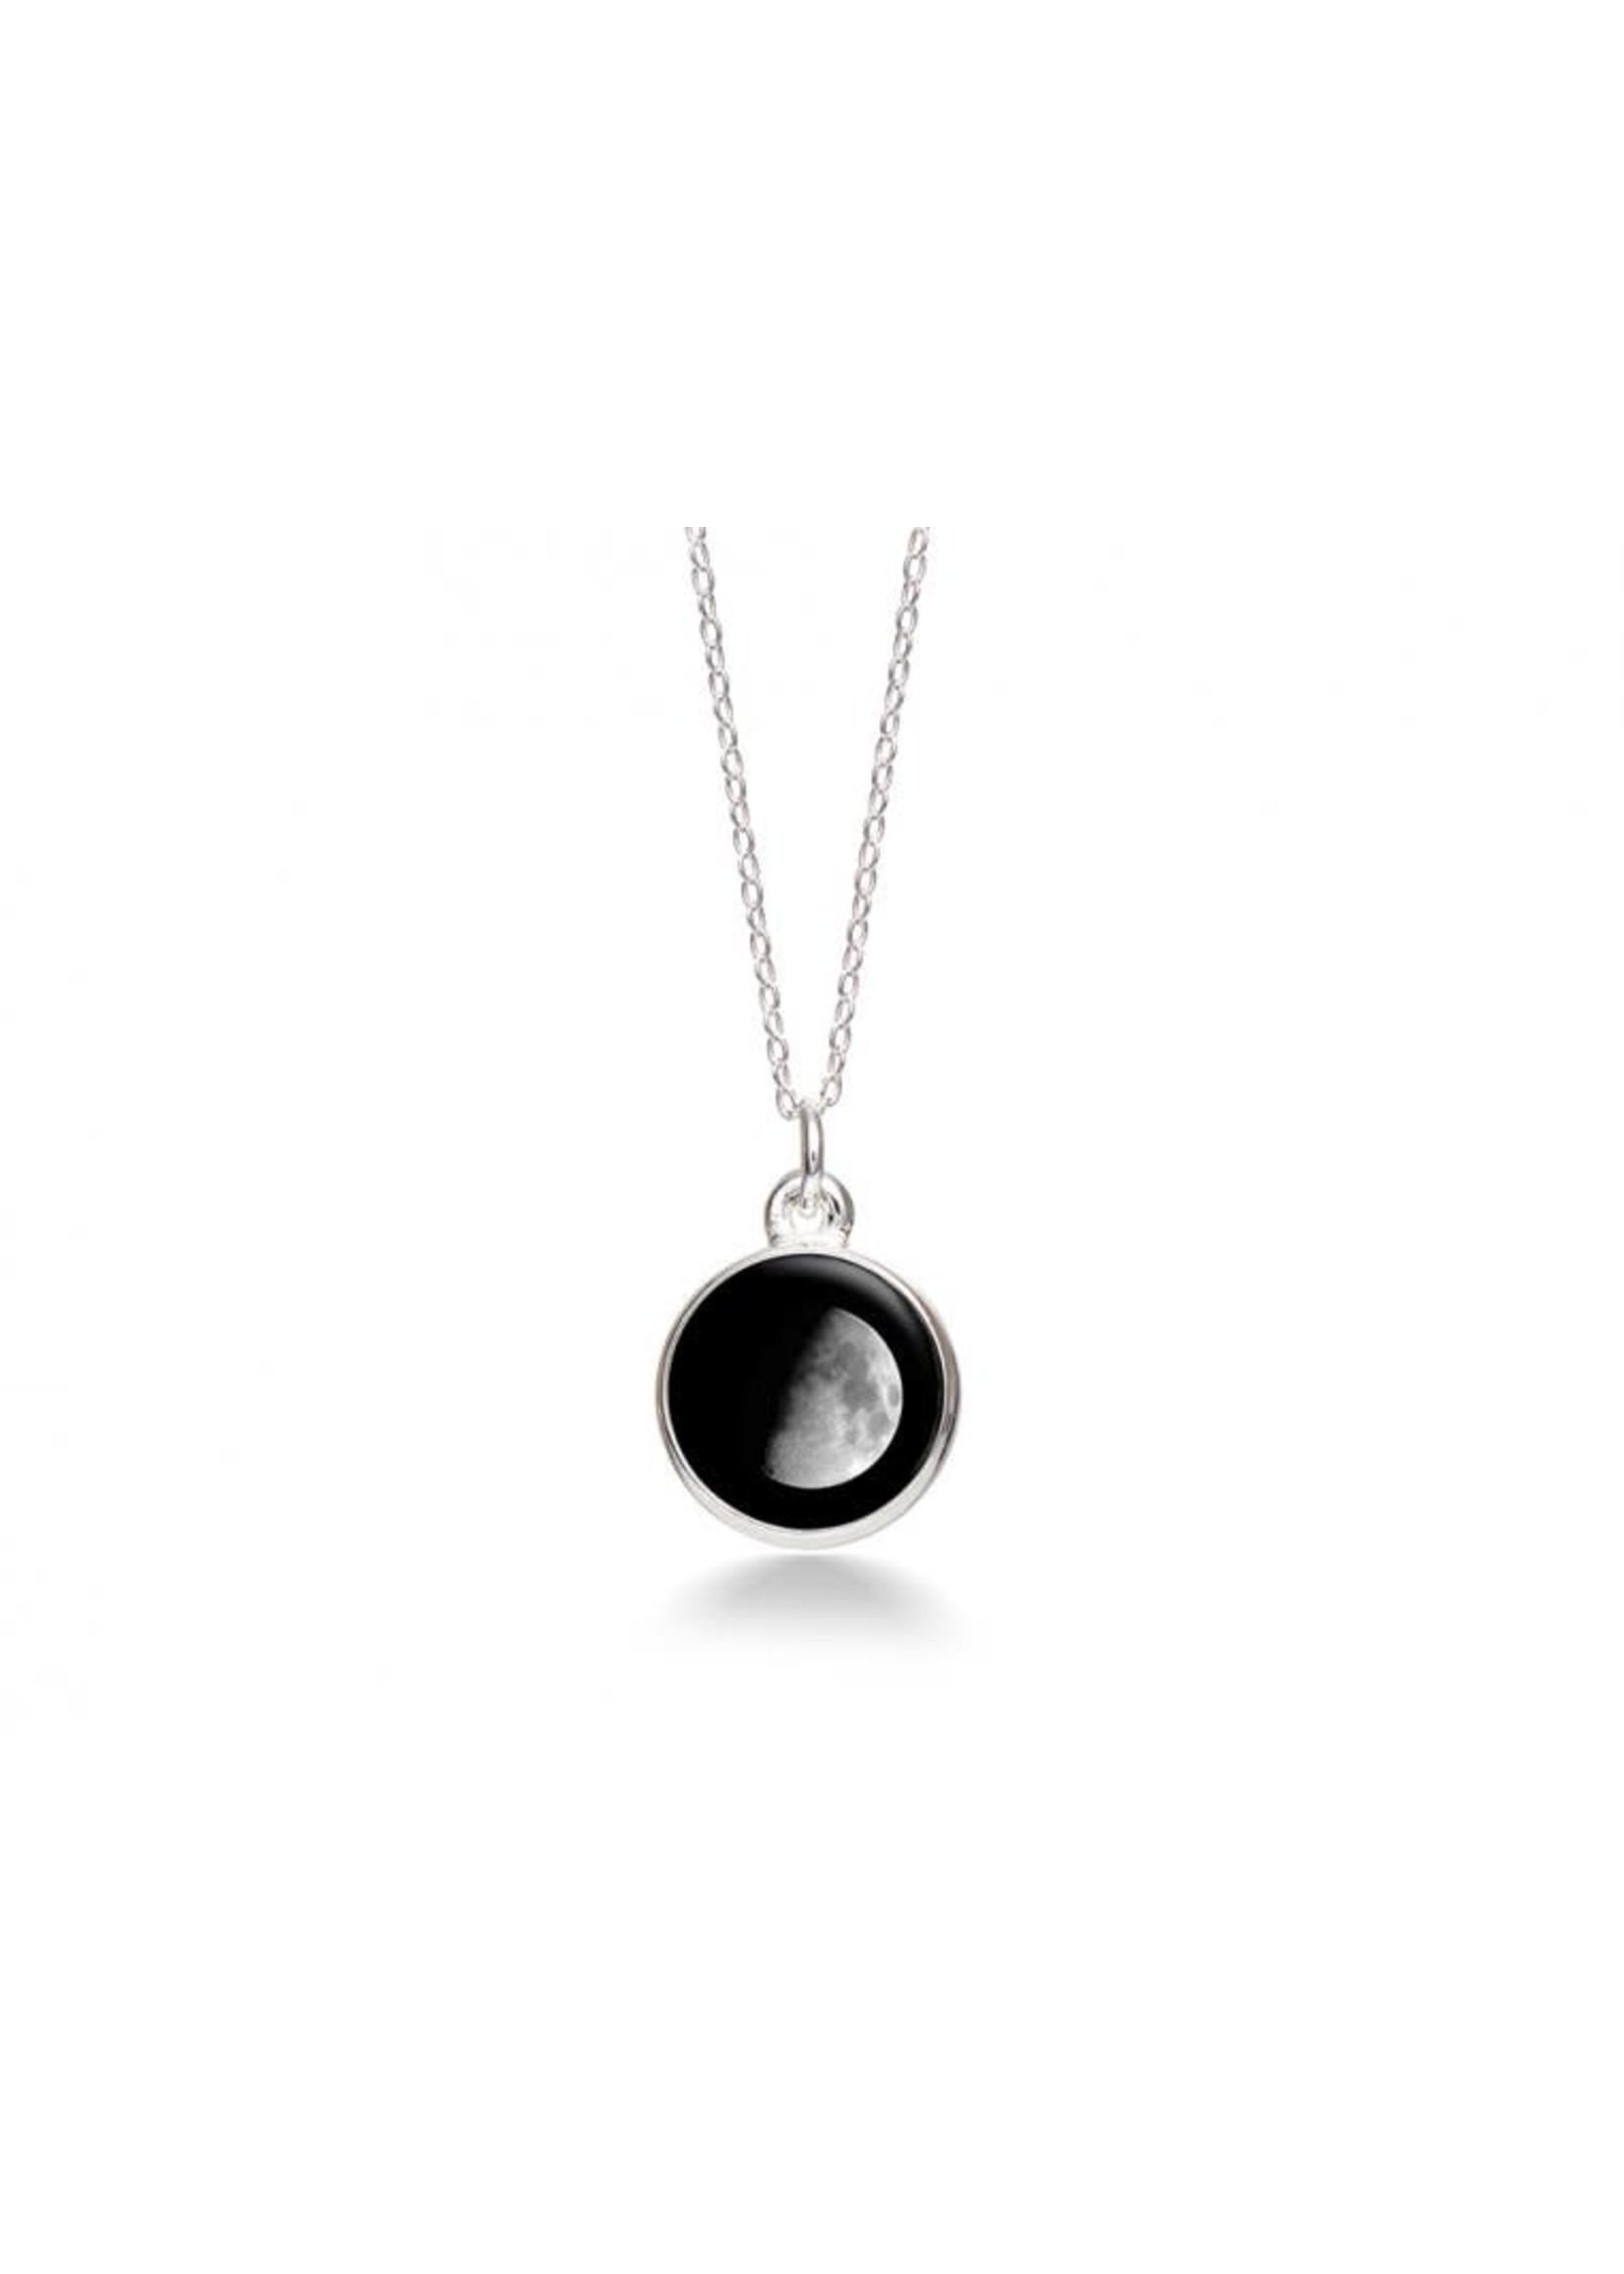 Moonglow Sterling Silver Necklaces